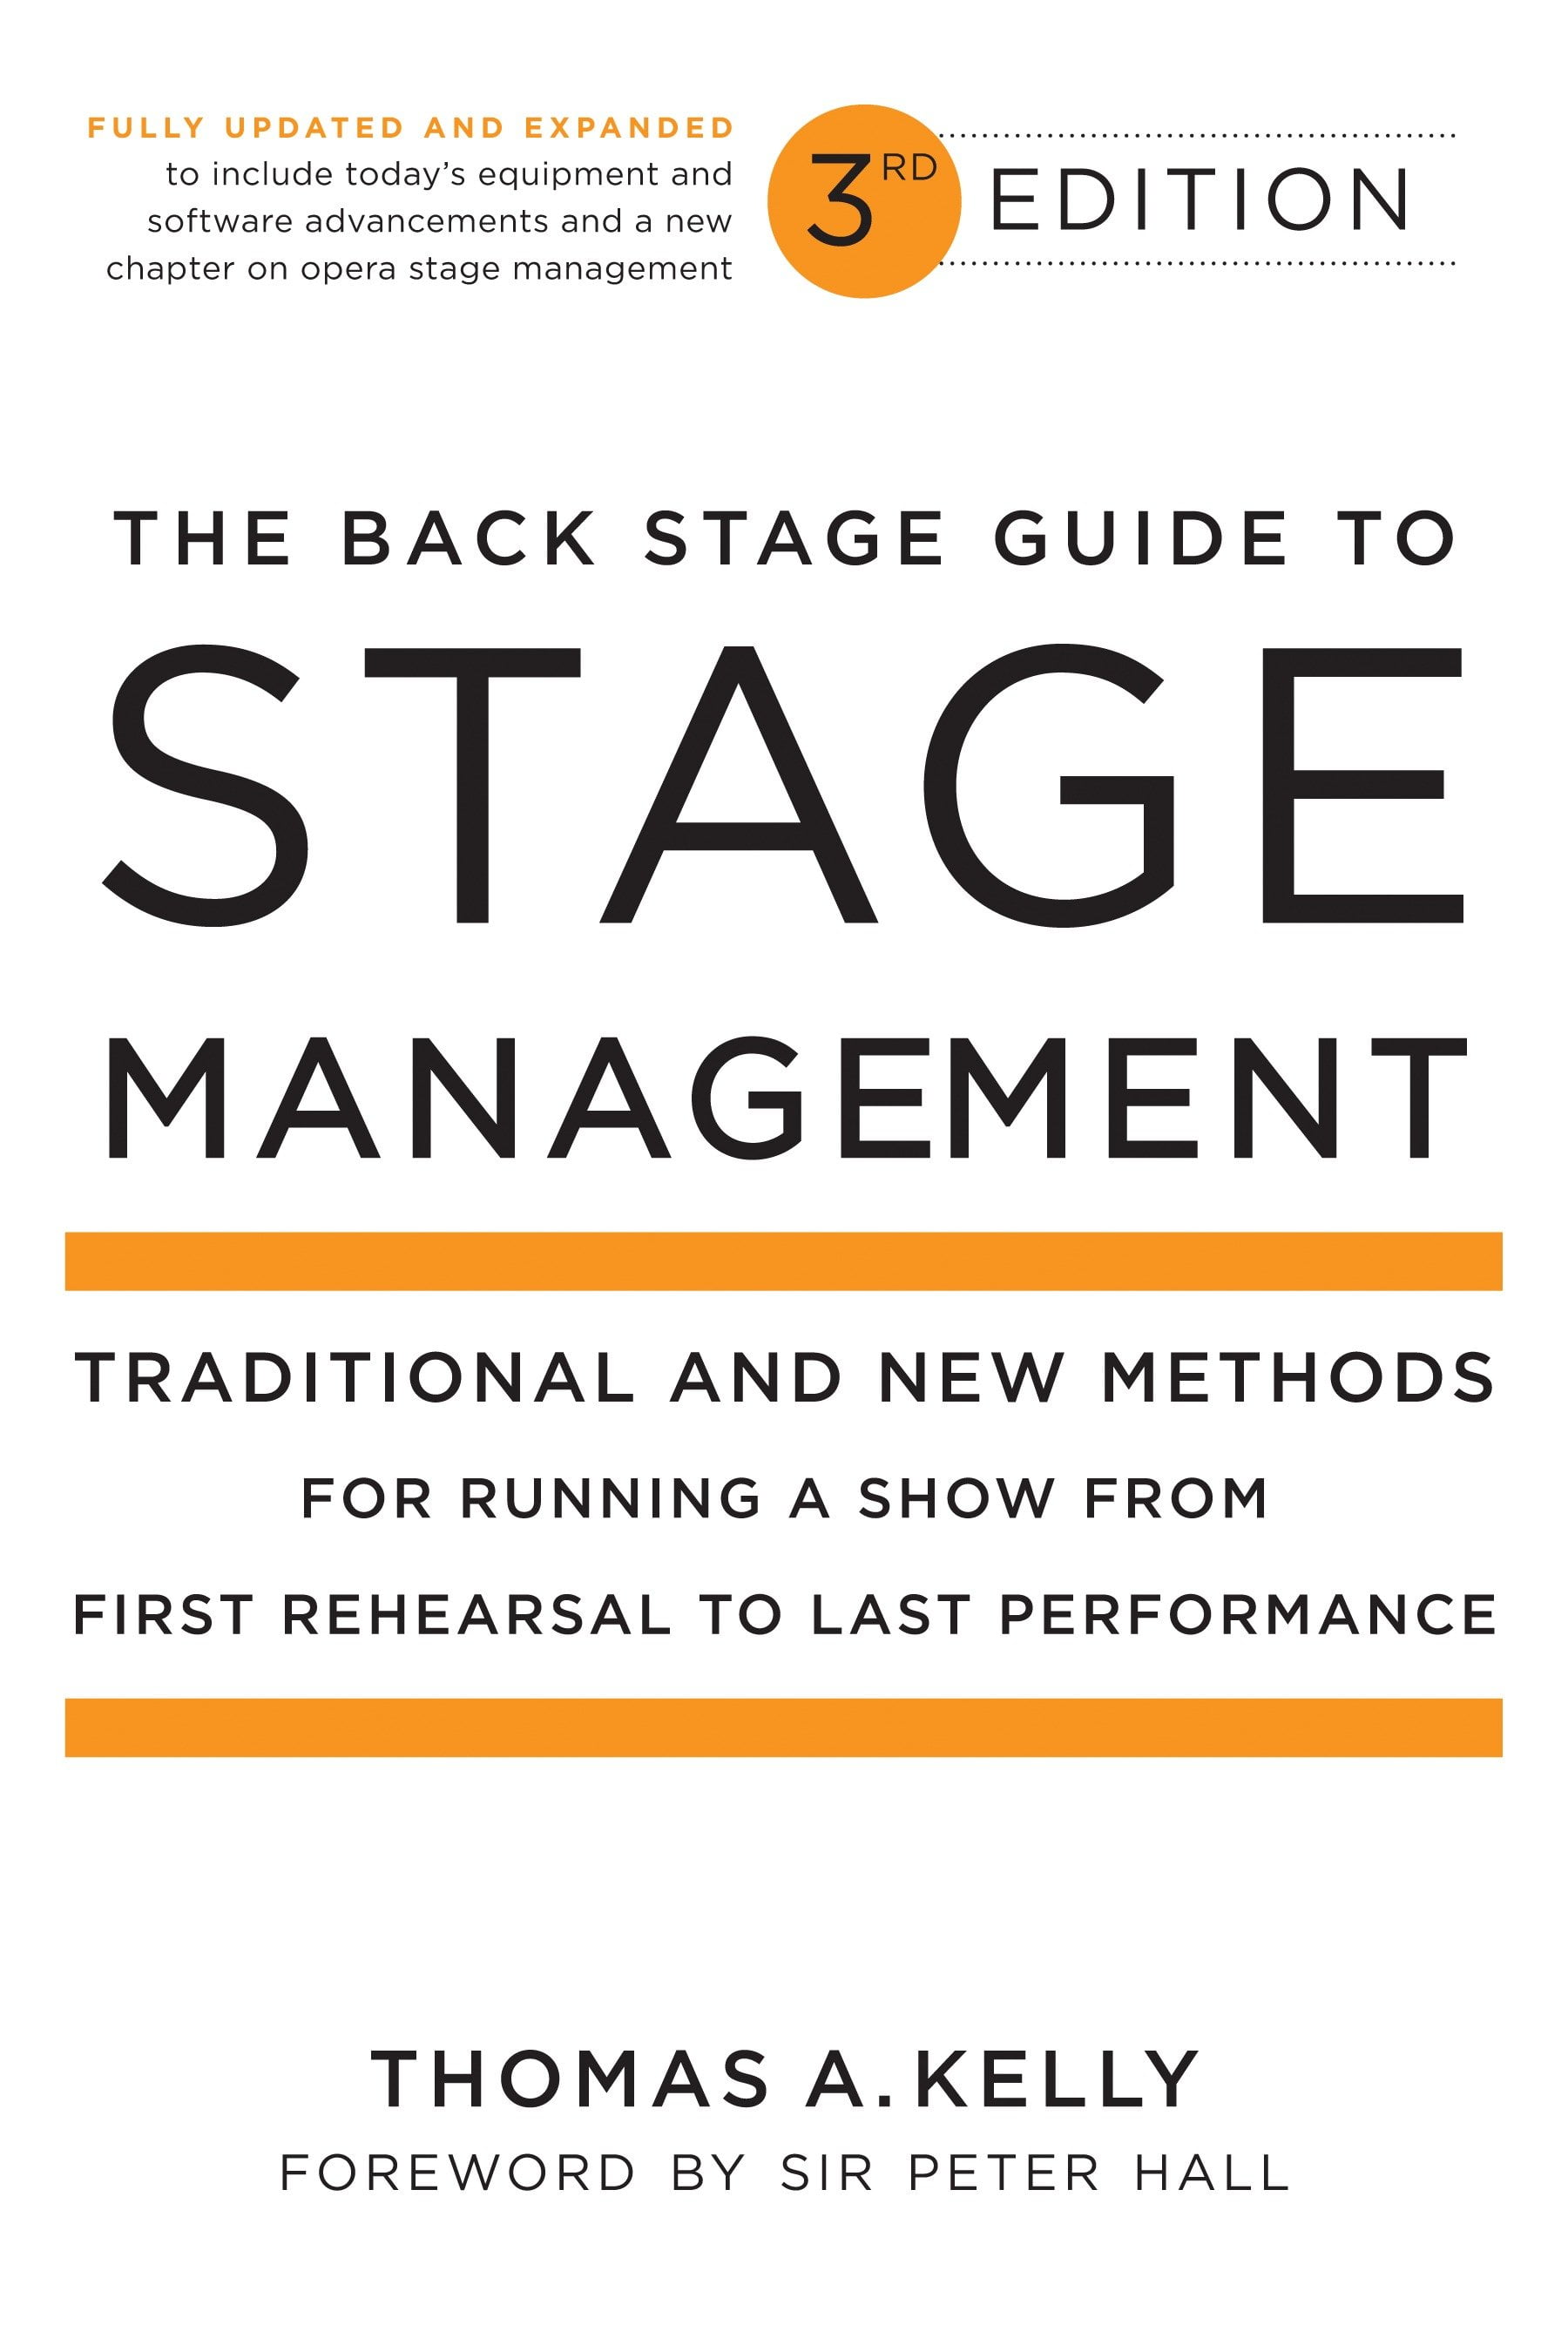 The Back Stage Guide to Stage Management 3rd Edition Traditional and
New Methods for Running a Show from First Rehearsal to Last Performance
Epub-Ebook